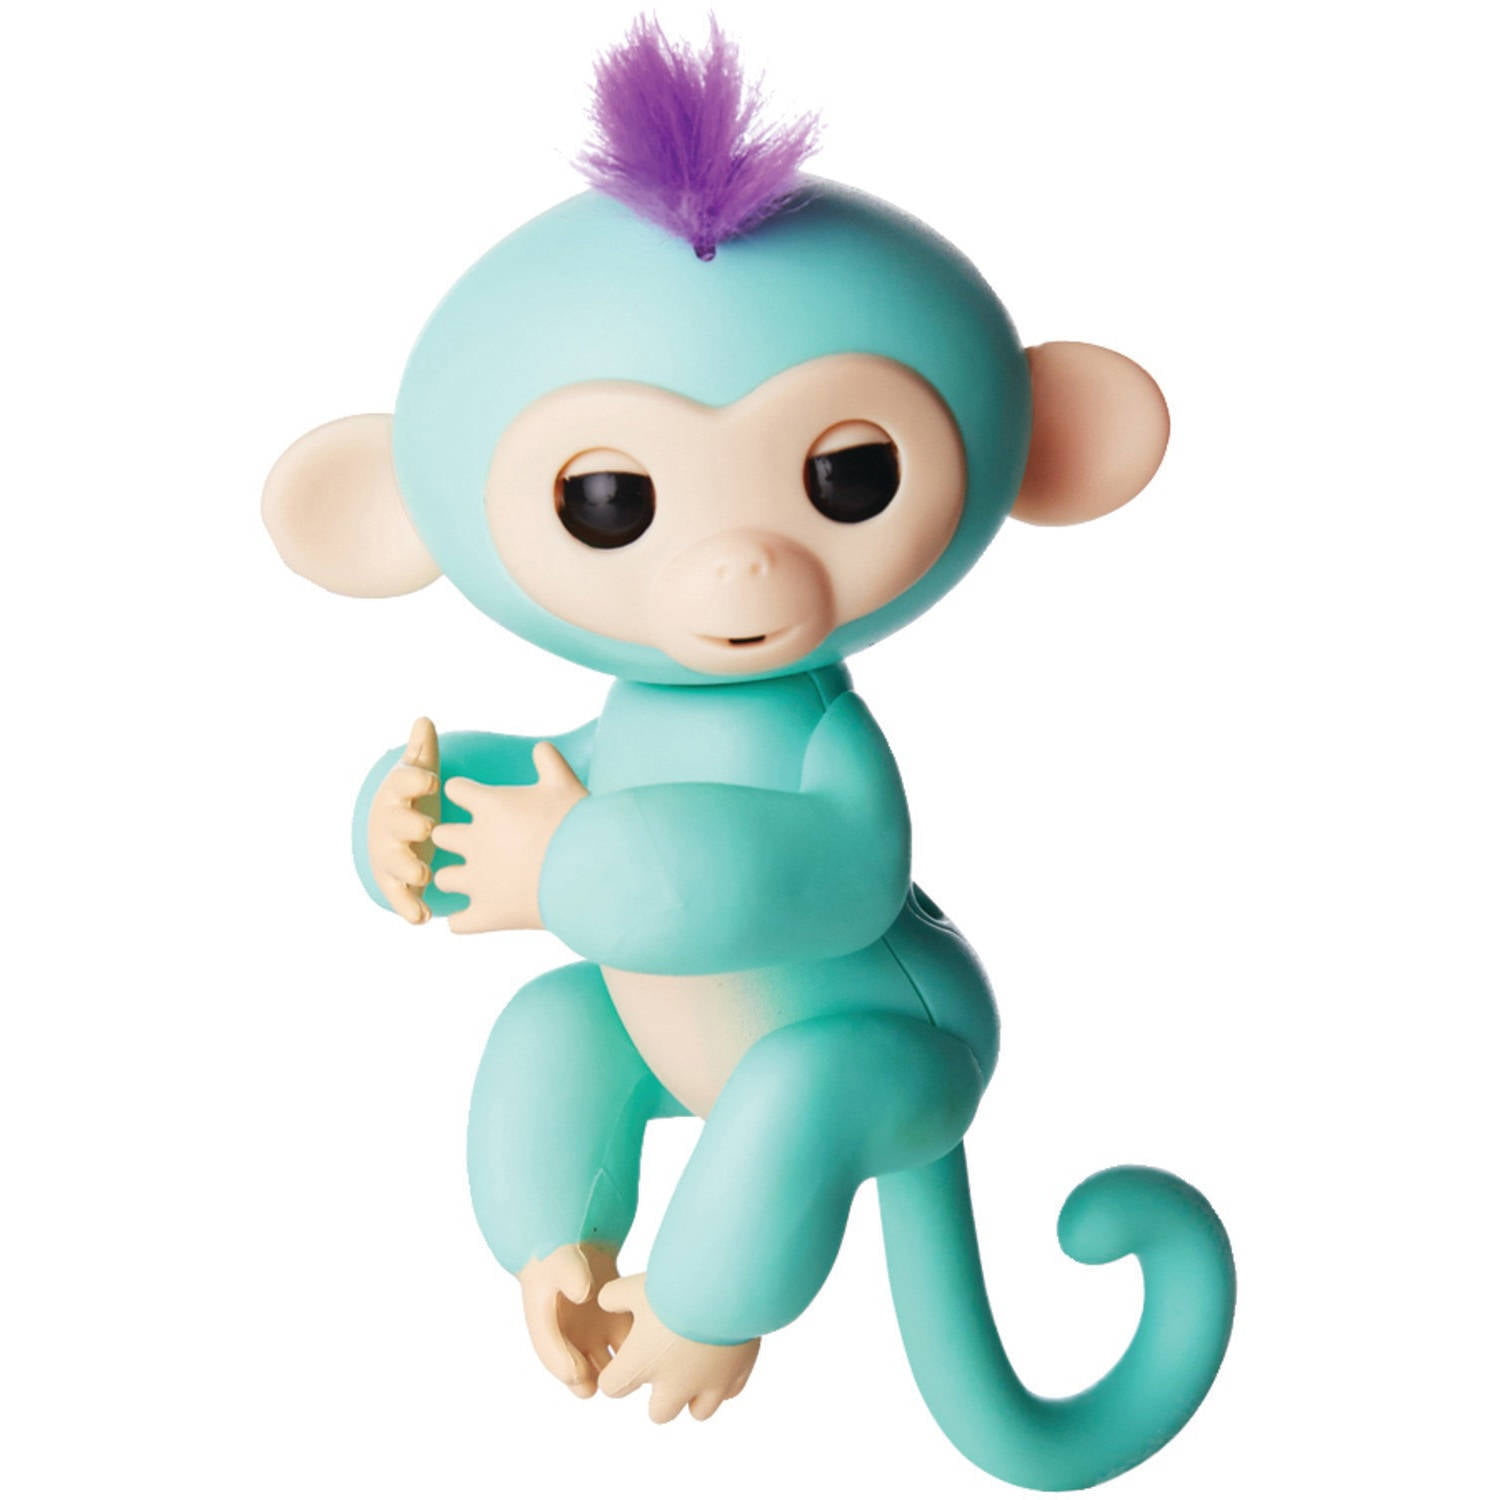 Zoe The Teal Turquoise Interactive Monkey WowWee Fingerling USA Ship